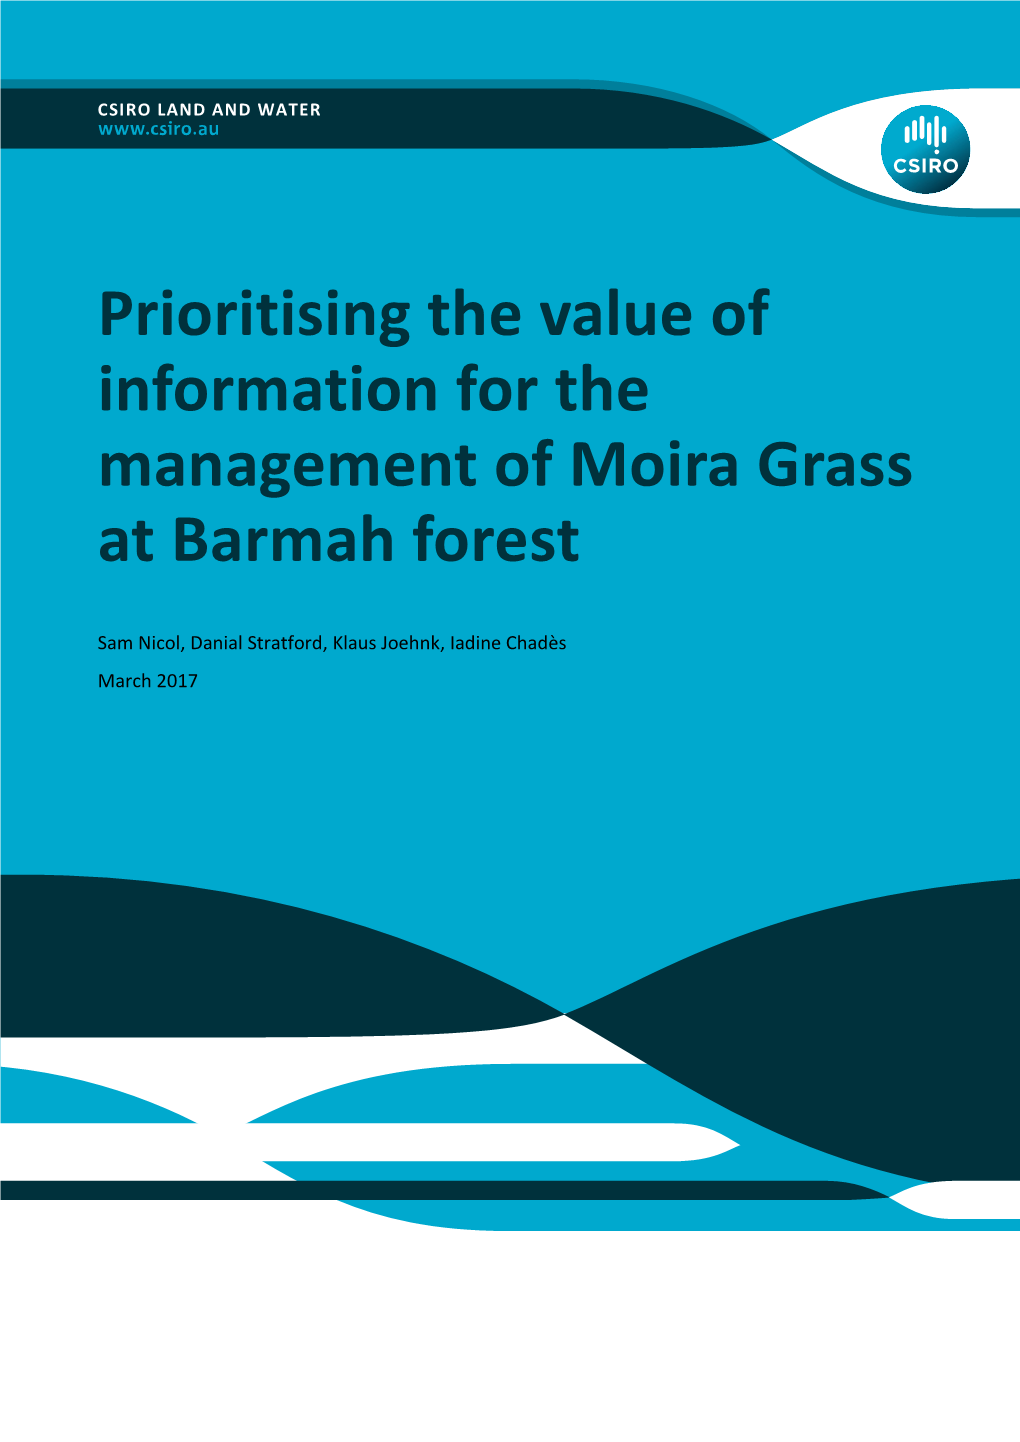 Prioritising the Value of Information for the Management of Moira Grass at Barmah Forest